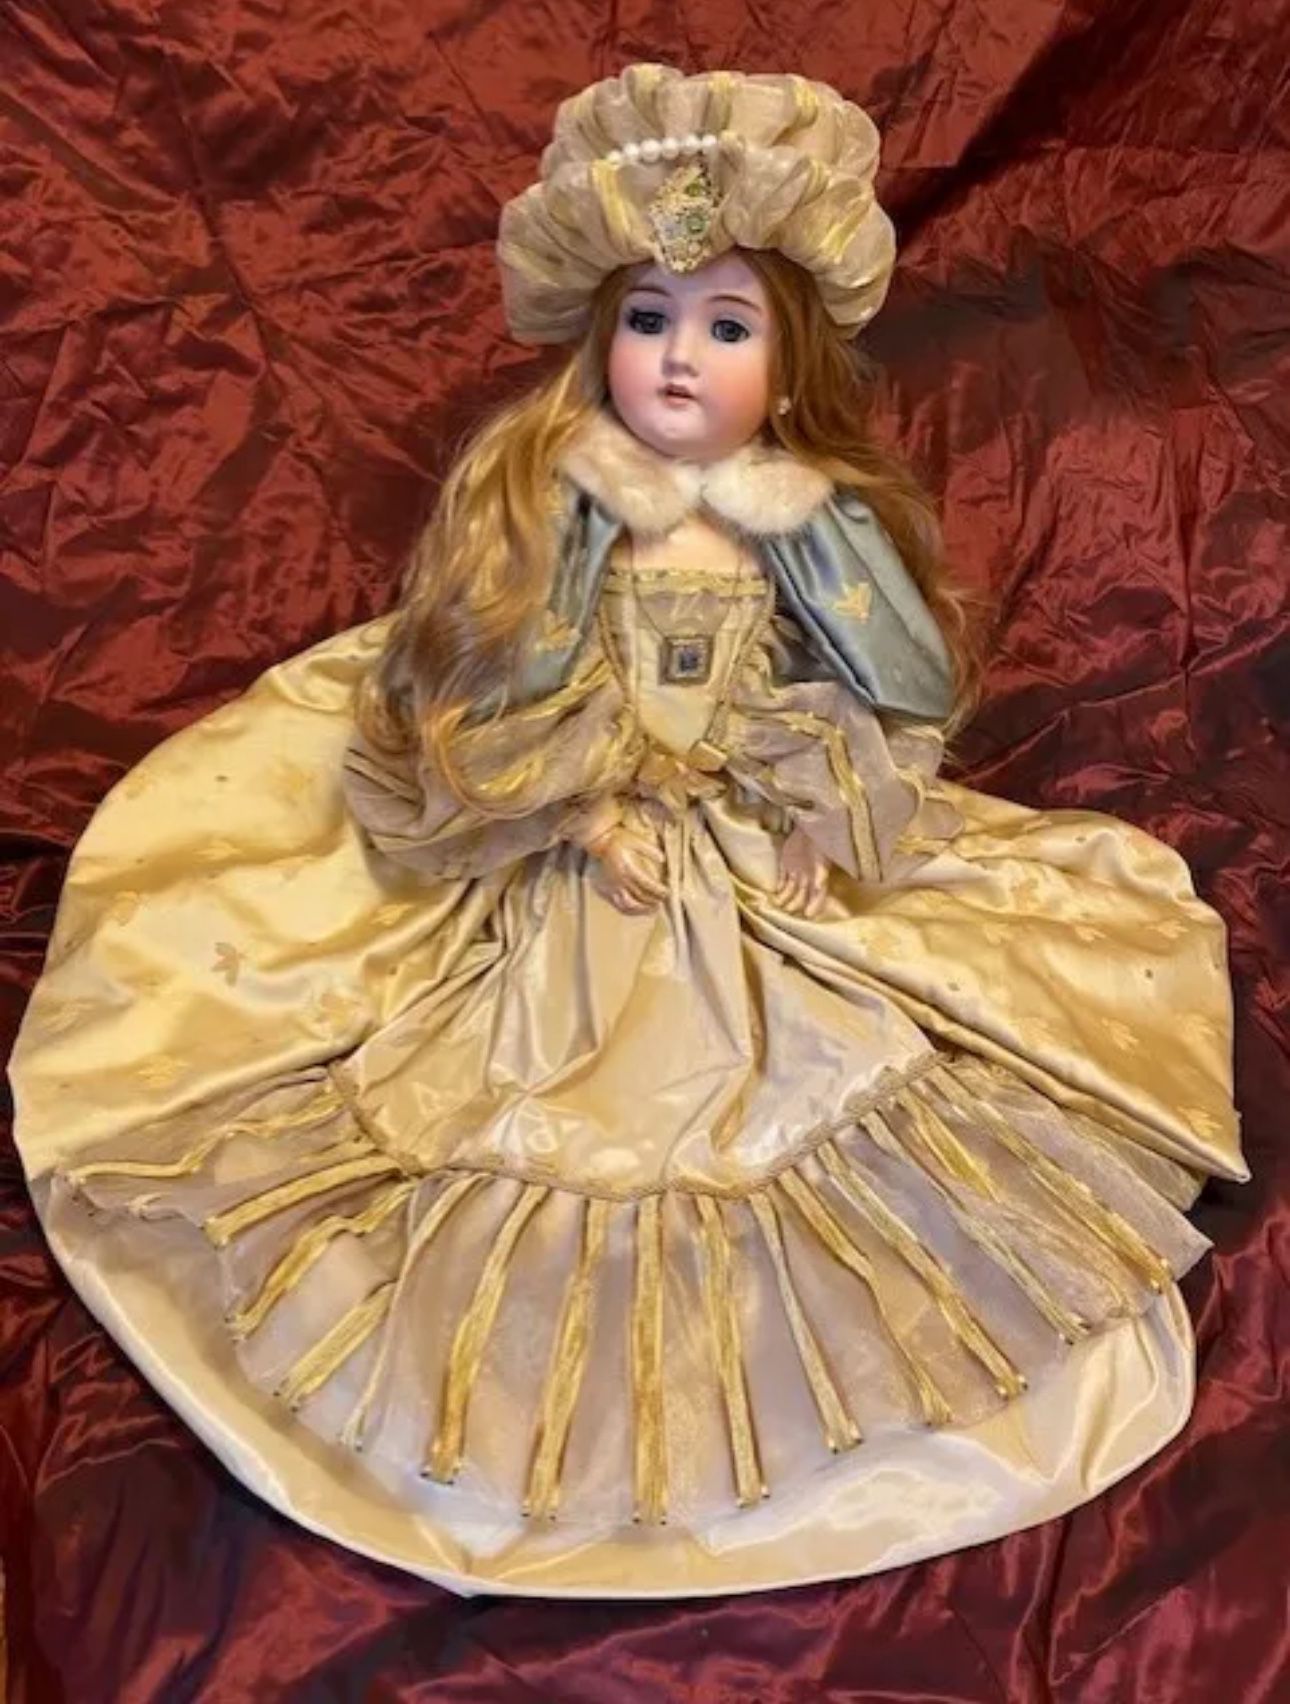 Large 36" German Bisque Walkure Doll Dressed as Princess or Queen by Kley & Hahn